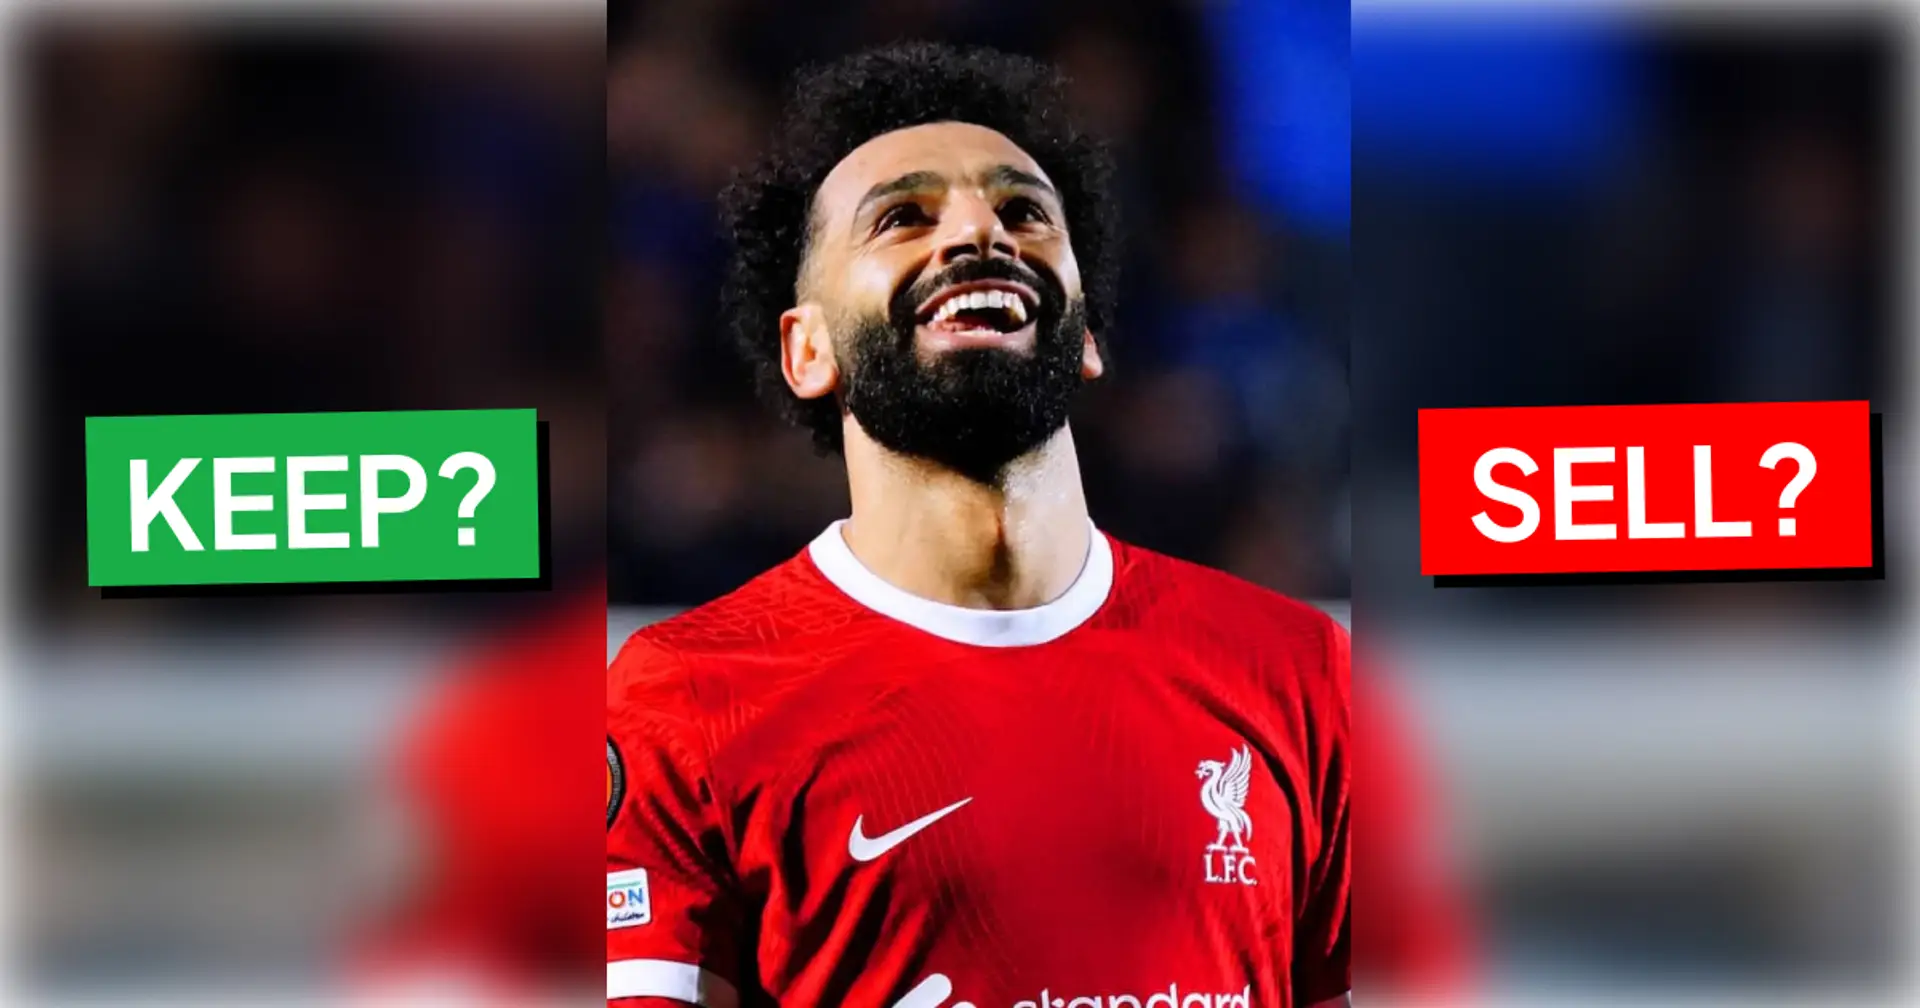 Salah — keep or sell? Liverpool fans split on Mo's future — have your say in the comments too